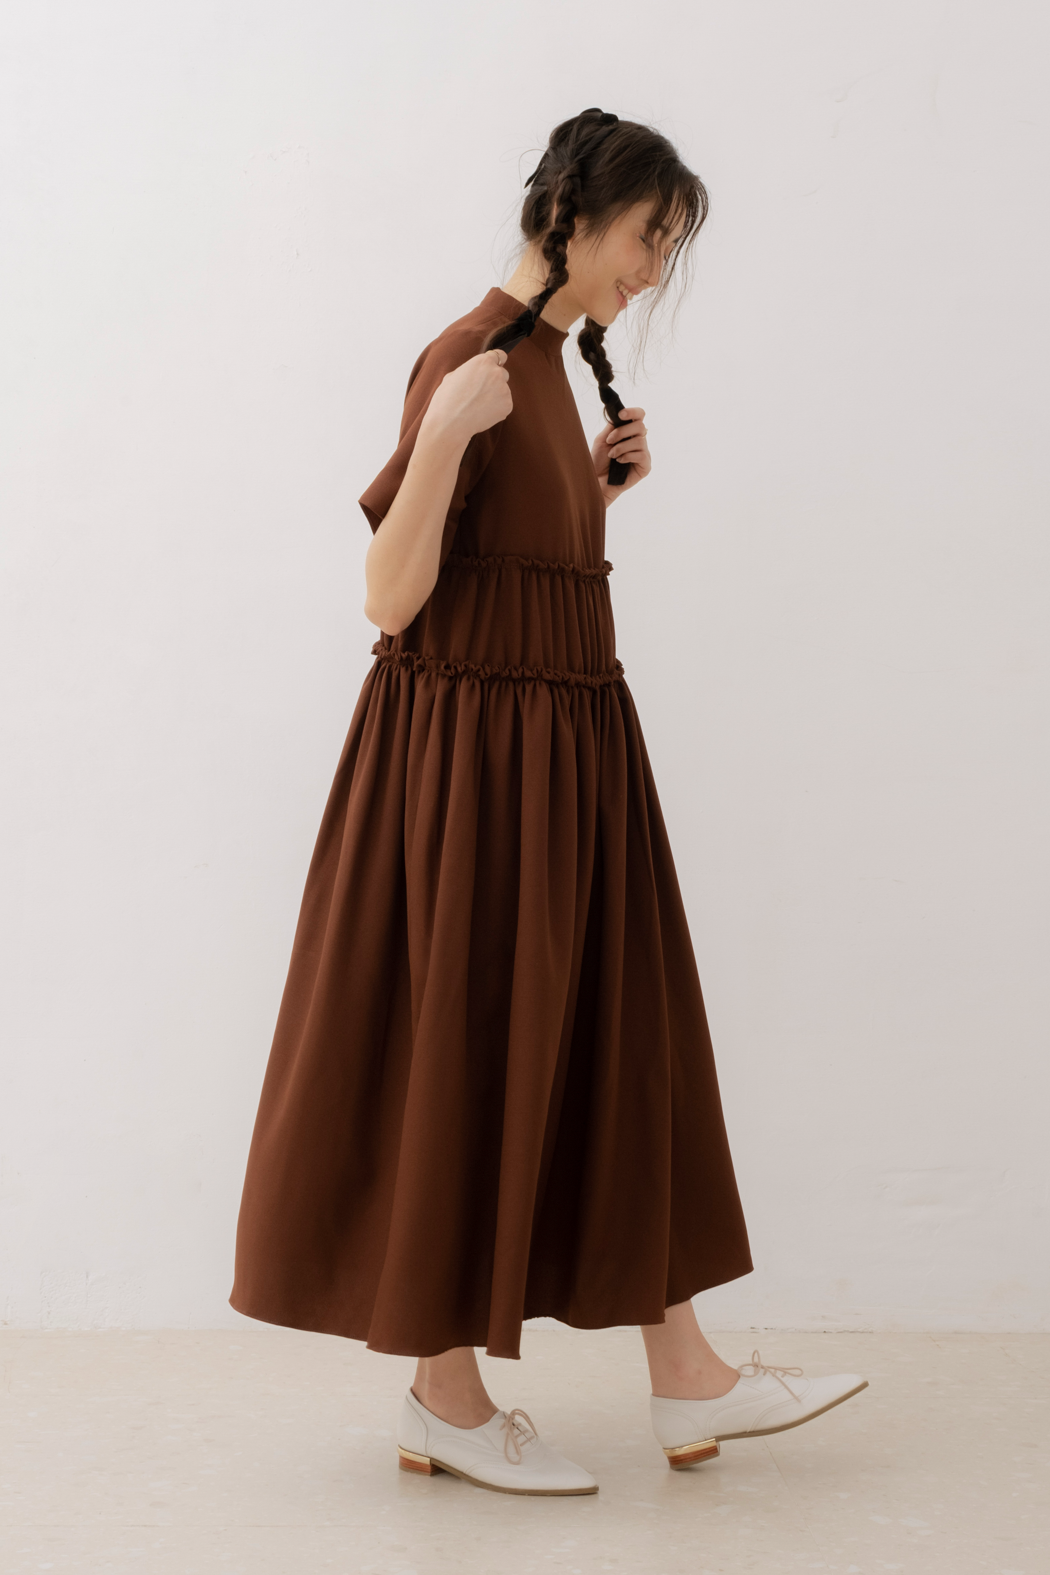 Nais Dress in Brown (40% Off)